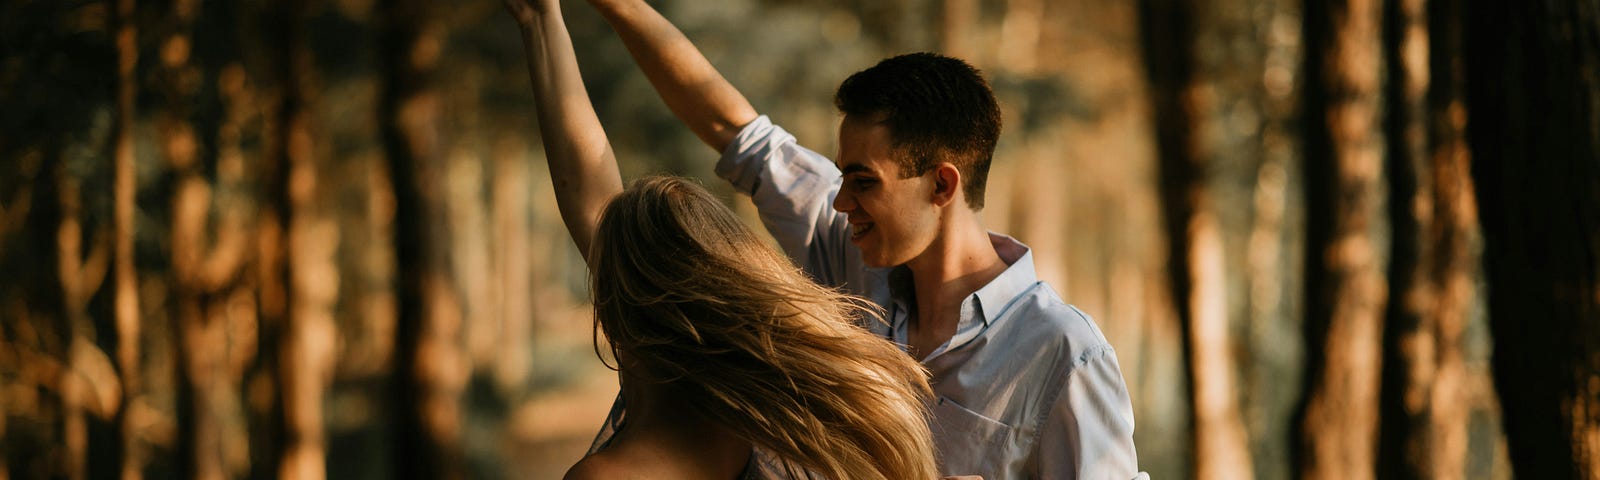 a man and woman dancing in the woods, very romantic